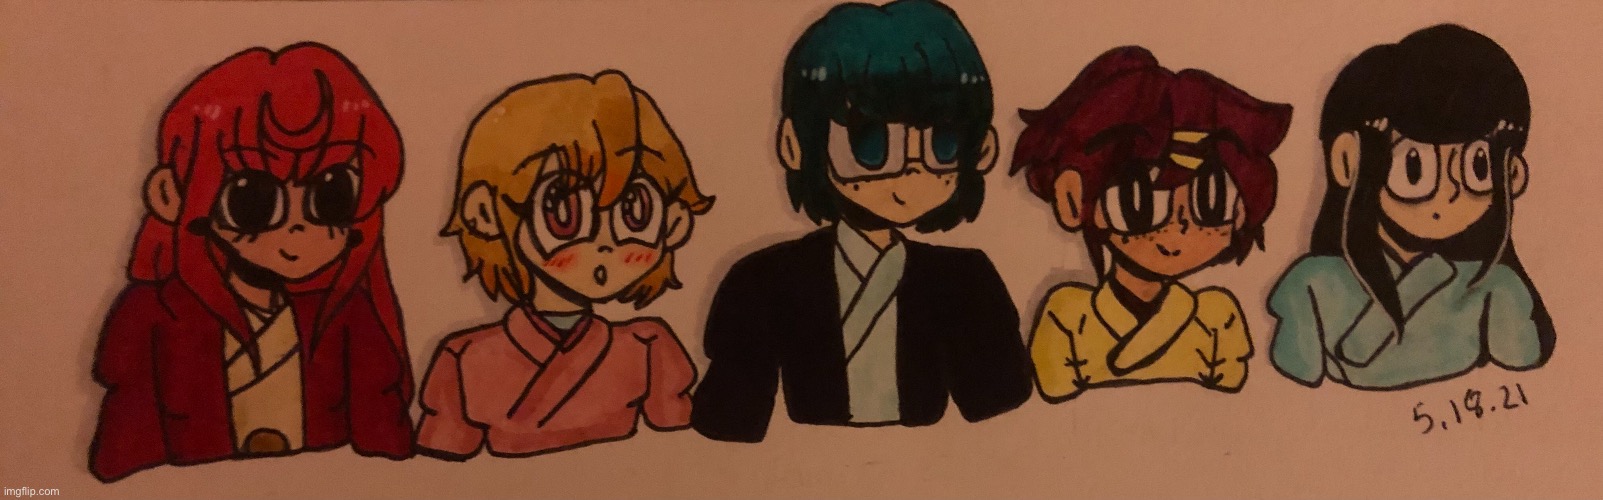 Here’s my drawing of the girls from “Joshiraku” Sorry for the poor lighting. I will probably make a better version of this soon. | image tagged in anime,fan art,girls,colorful | made w/ Imgflip meme maker